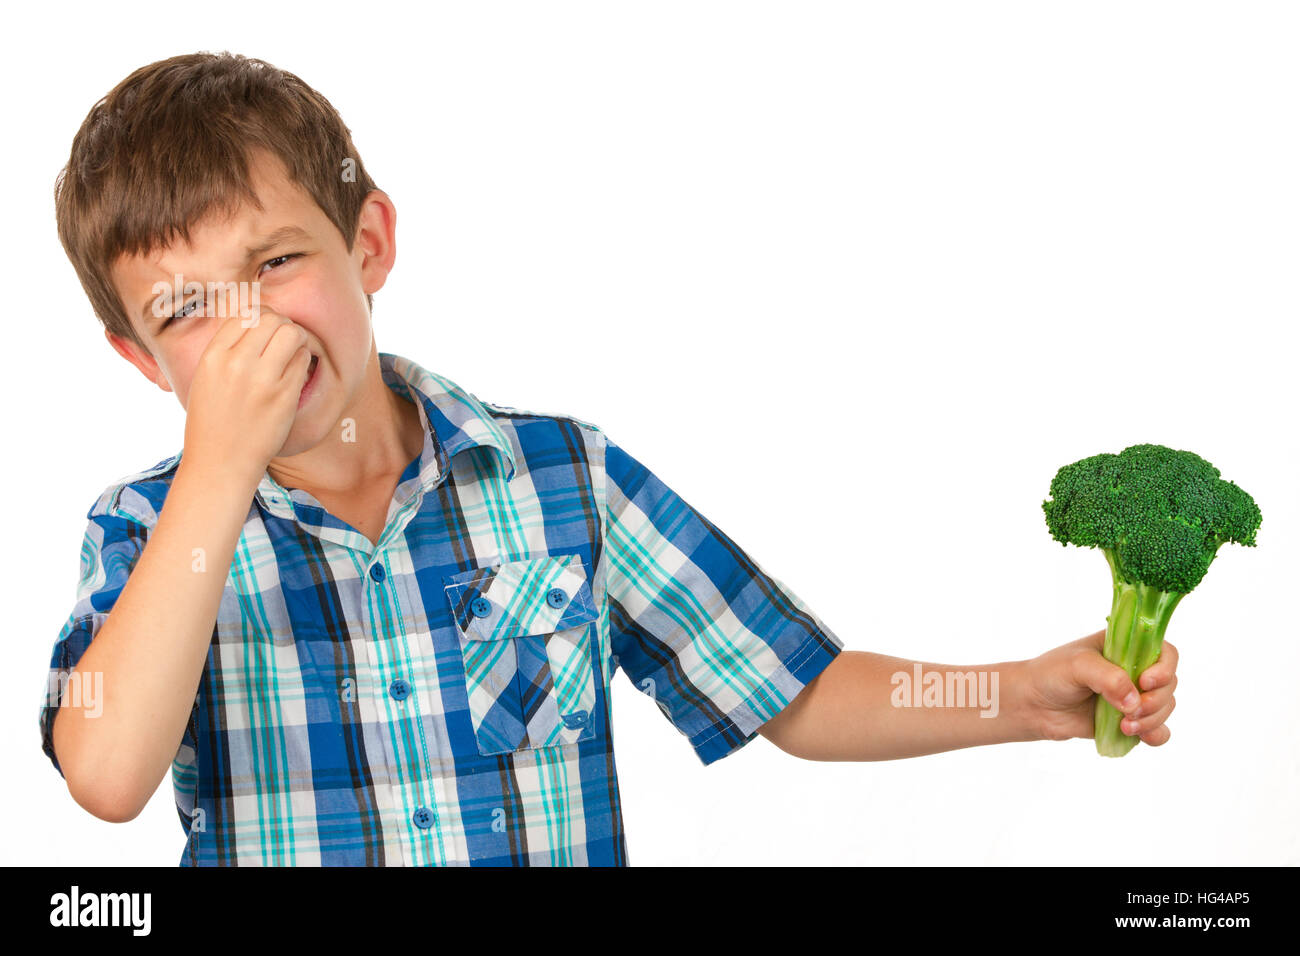 Small Boy Holding a Bunch of Broccoli and has a disgusted look on his face Stock Photo